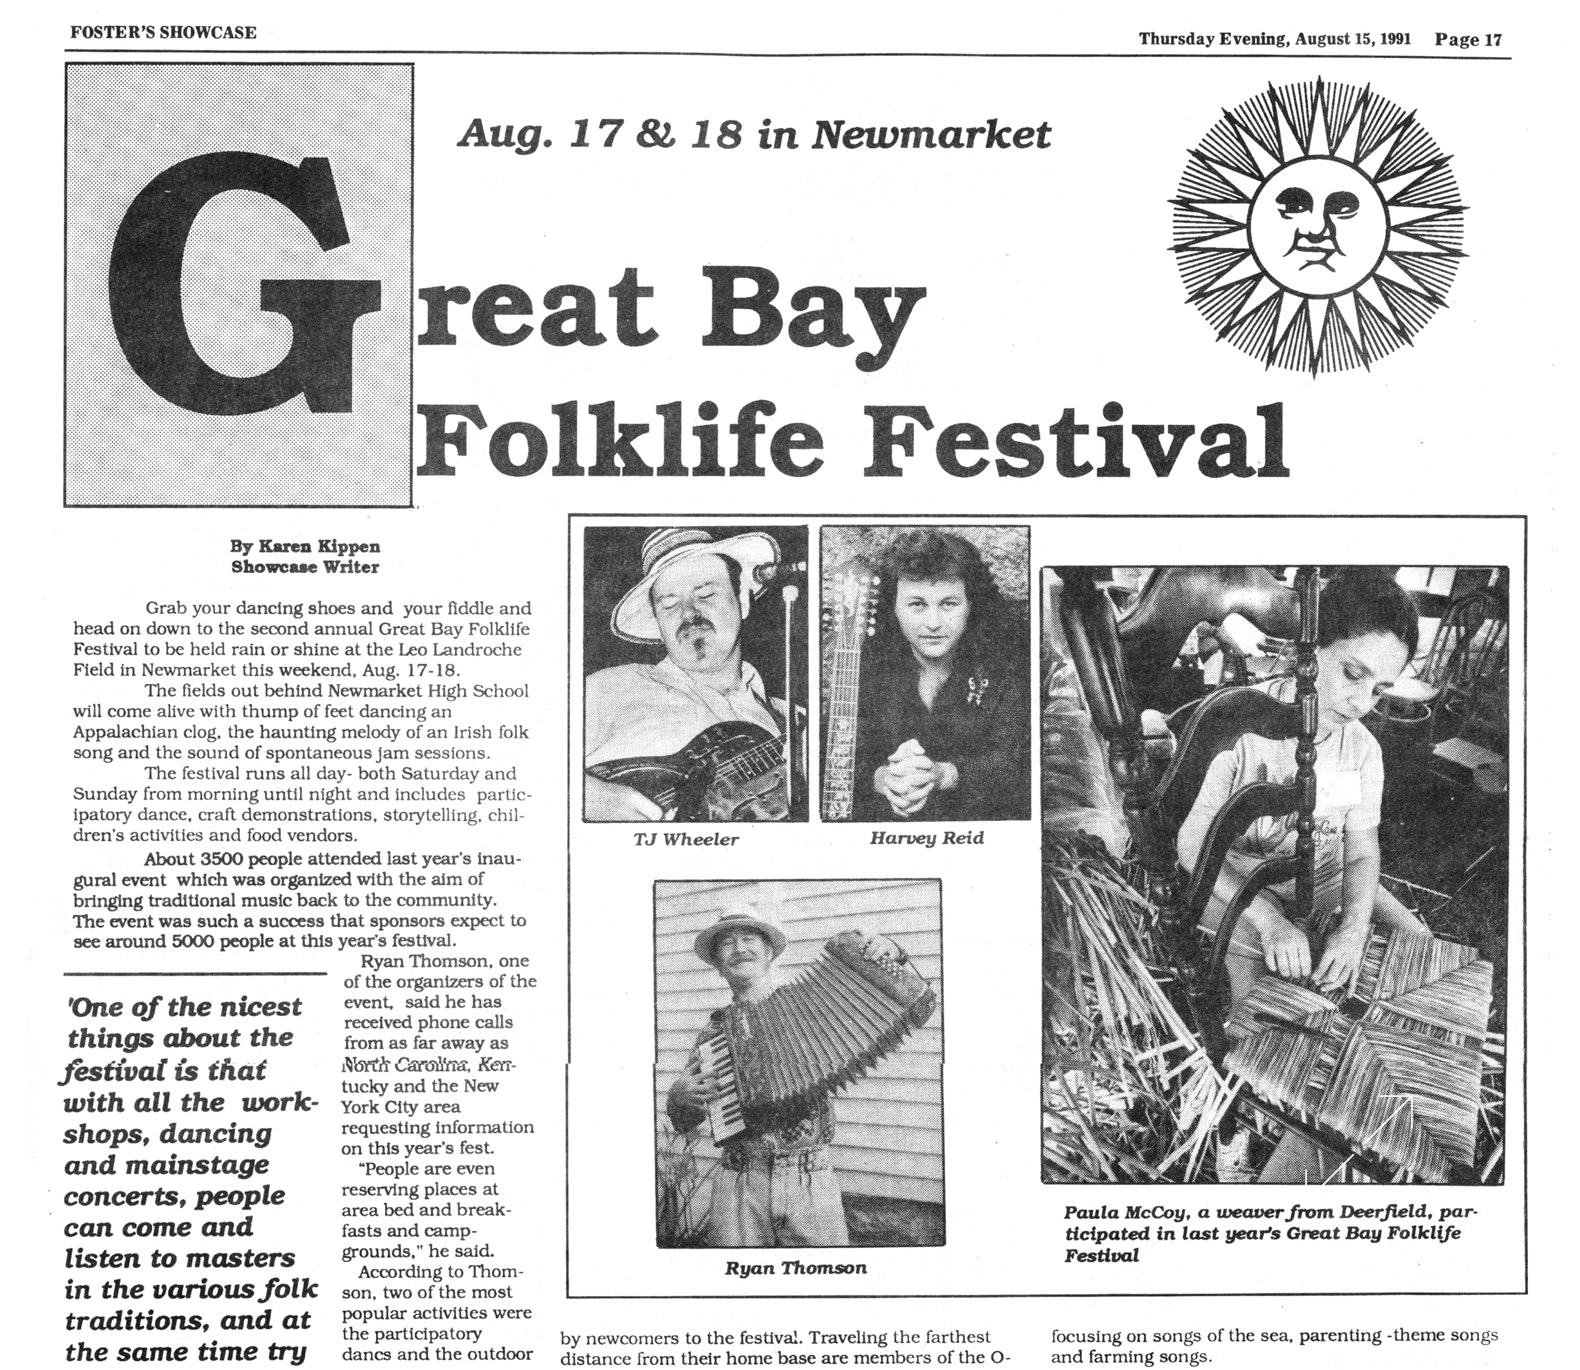 Foster's Showcase article for the Great Bay Folk festival, August 17 and 18, 1991, image 1 of 2.